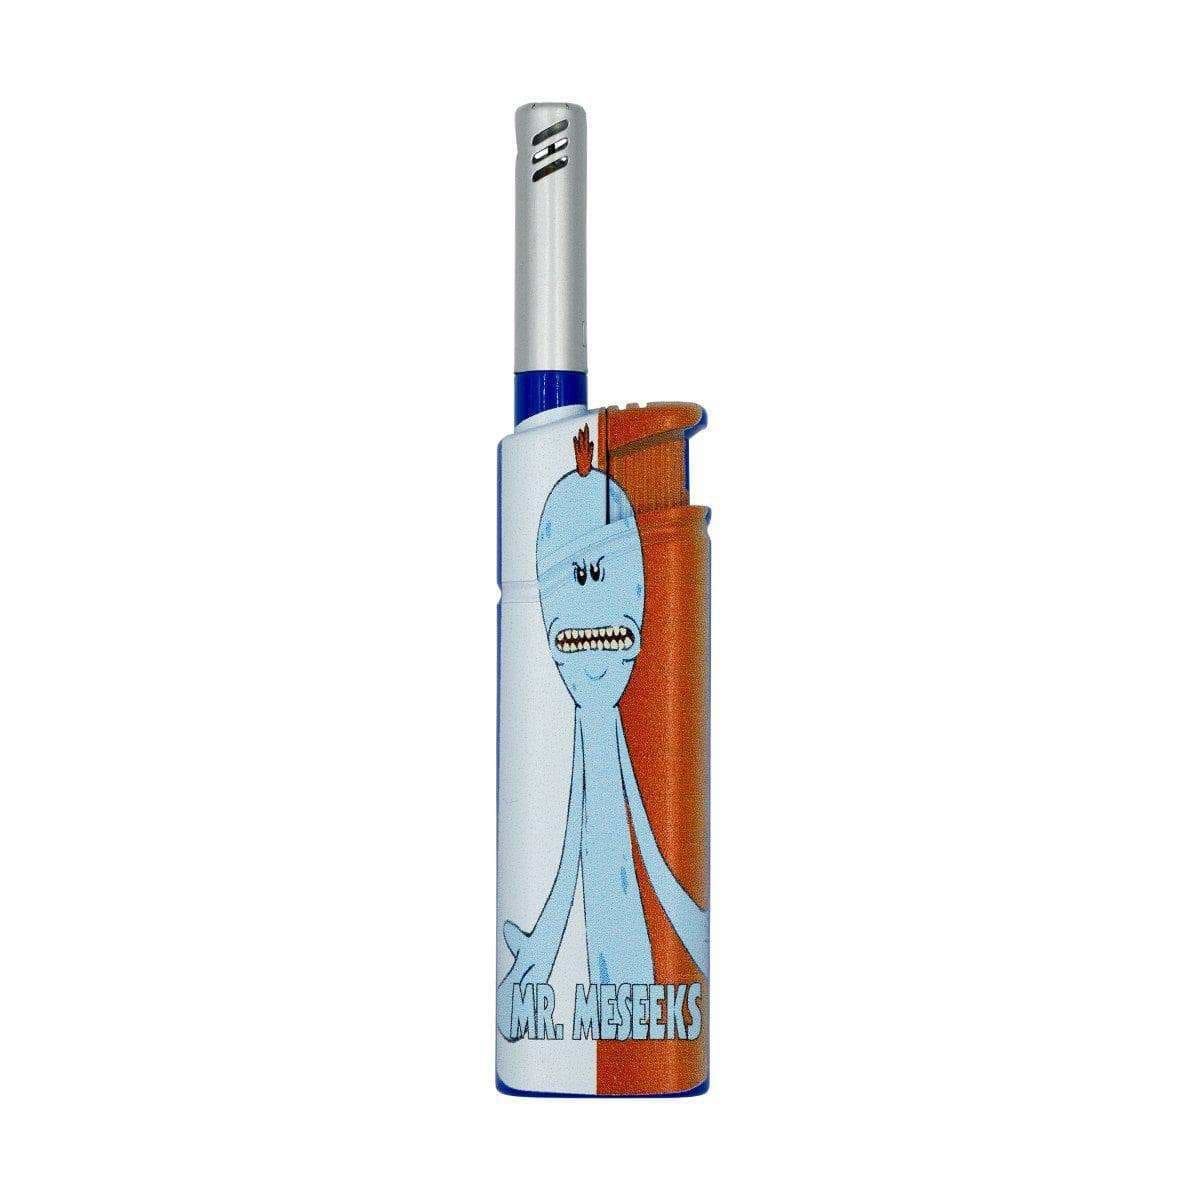 Compact classic shape torch lighter smoking device accessory with Mr. Meseeks character design